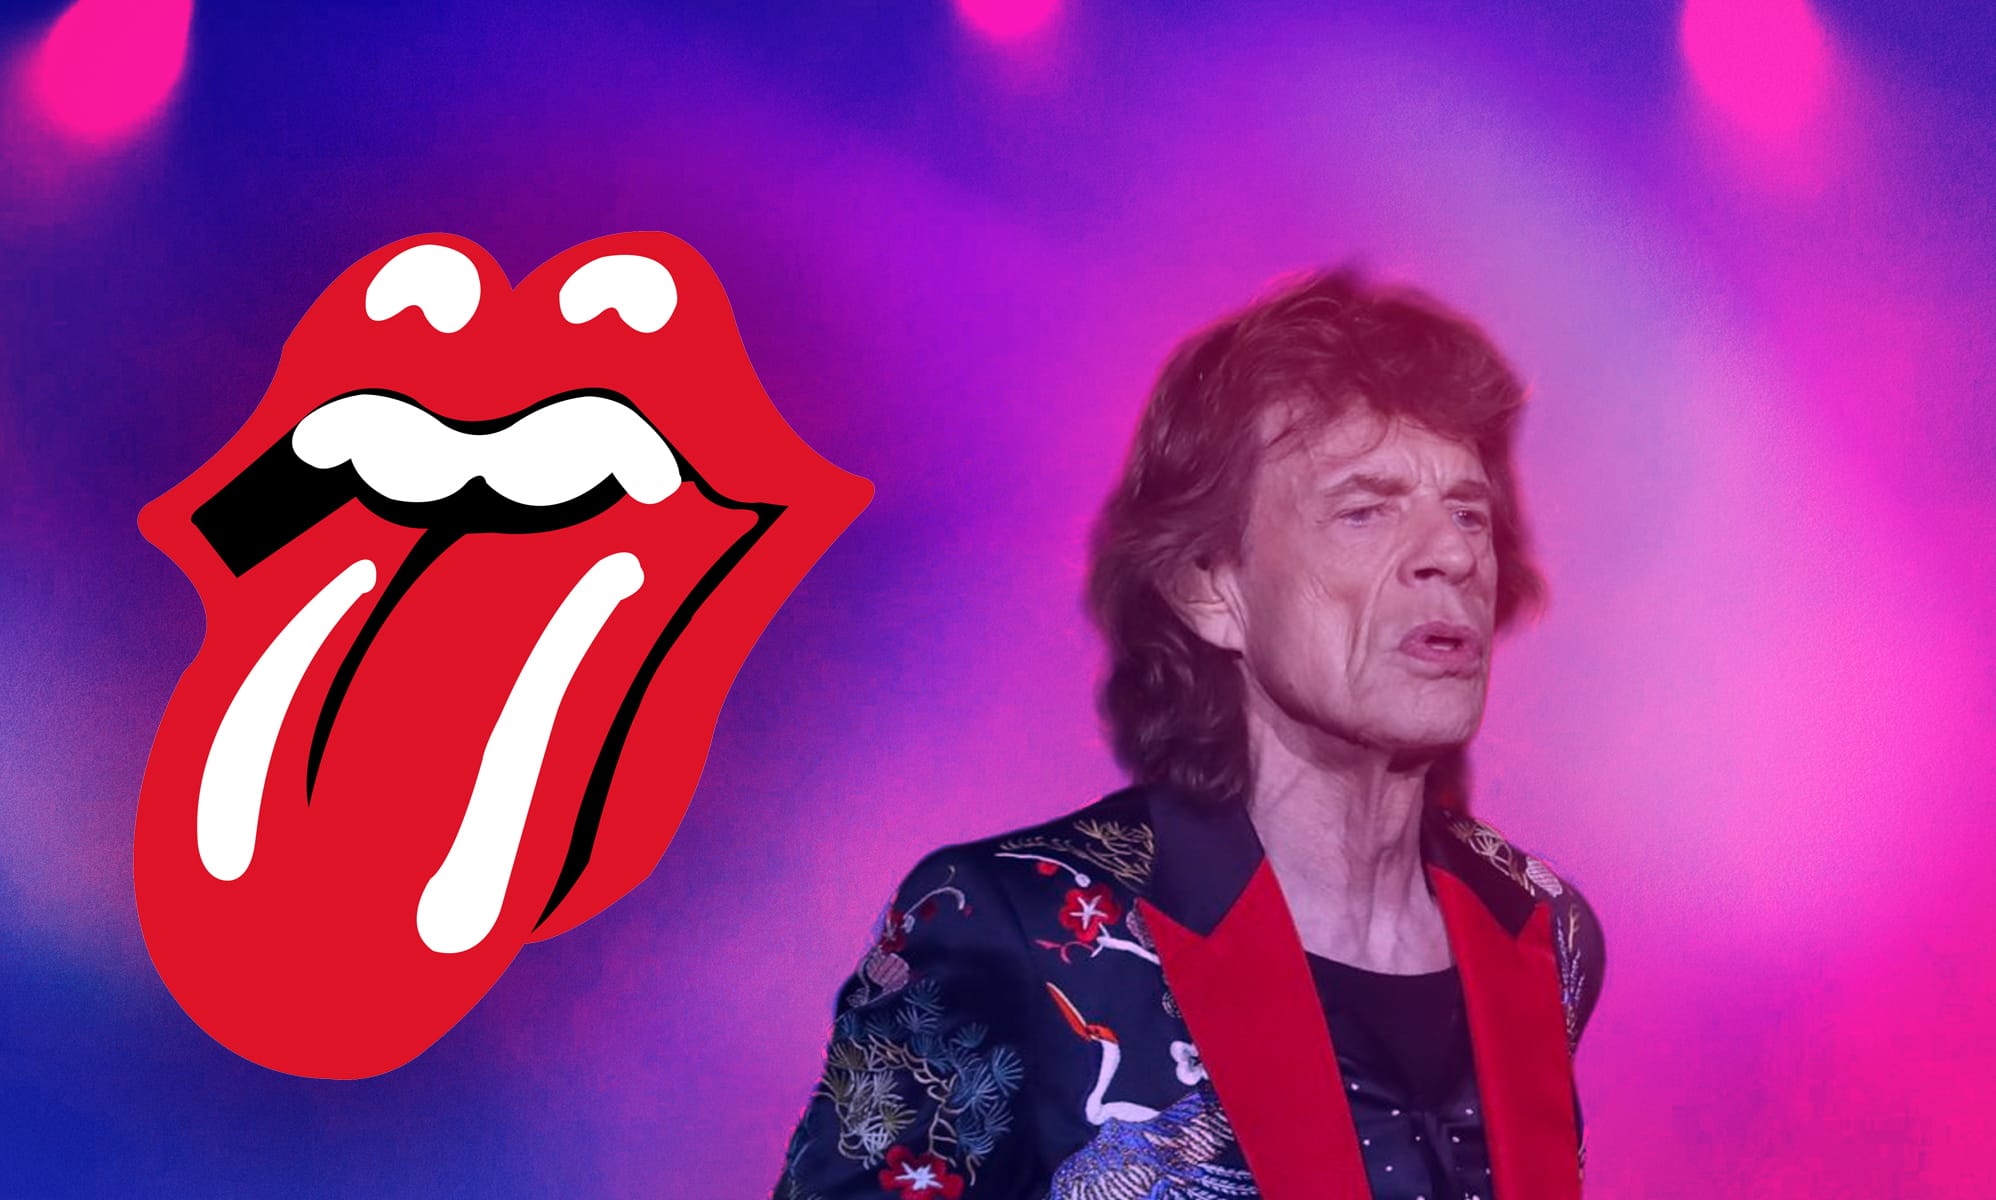 New Book Claims Mick Jagger Had Flings With Two Bandmates